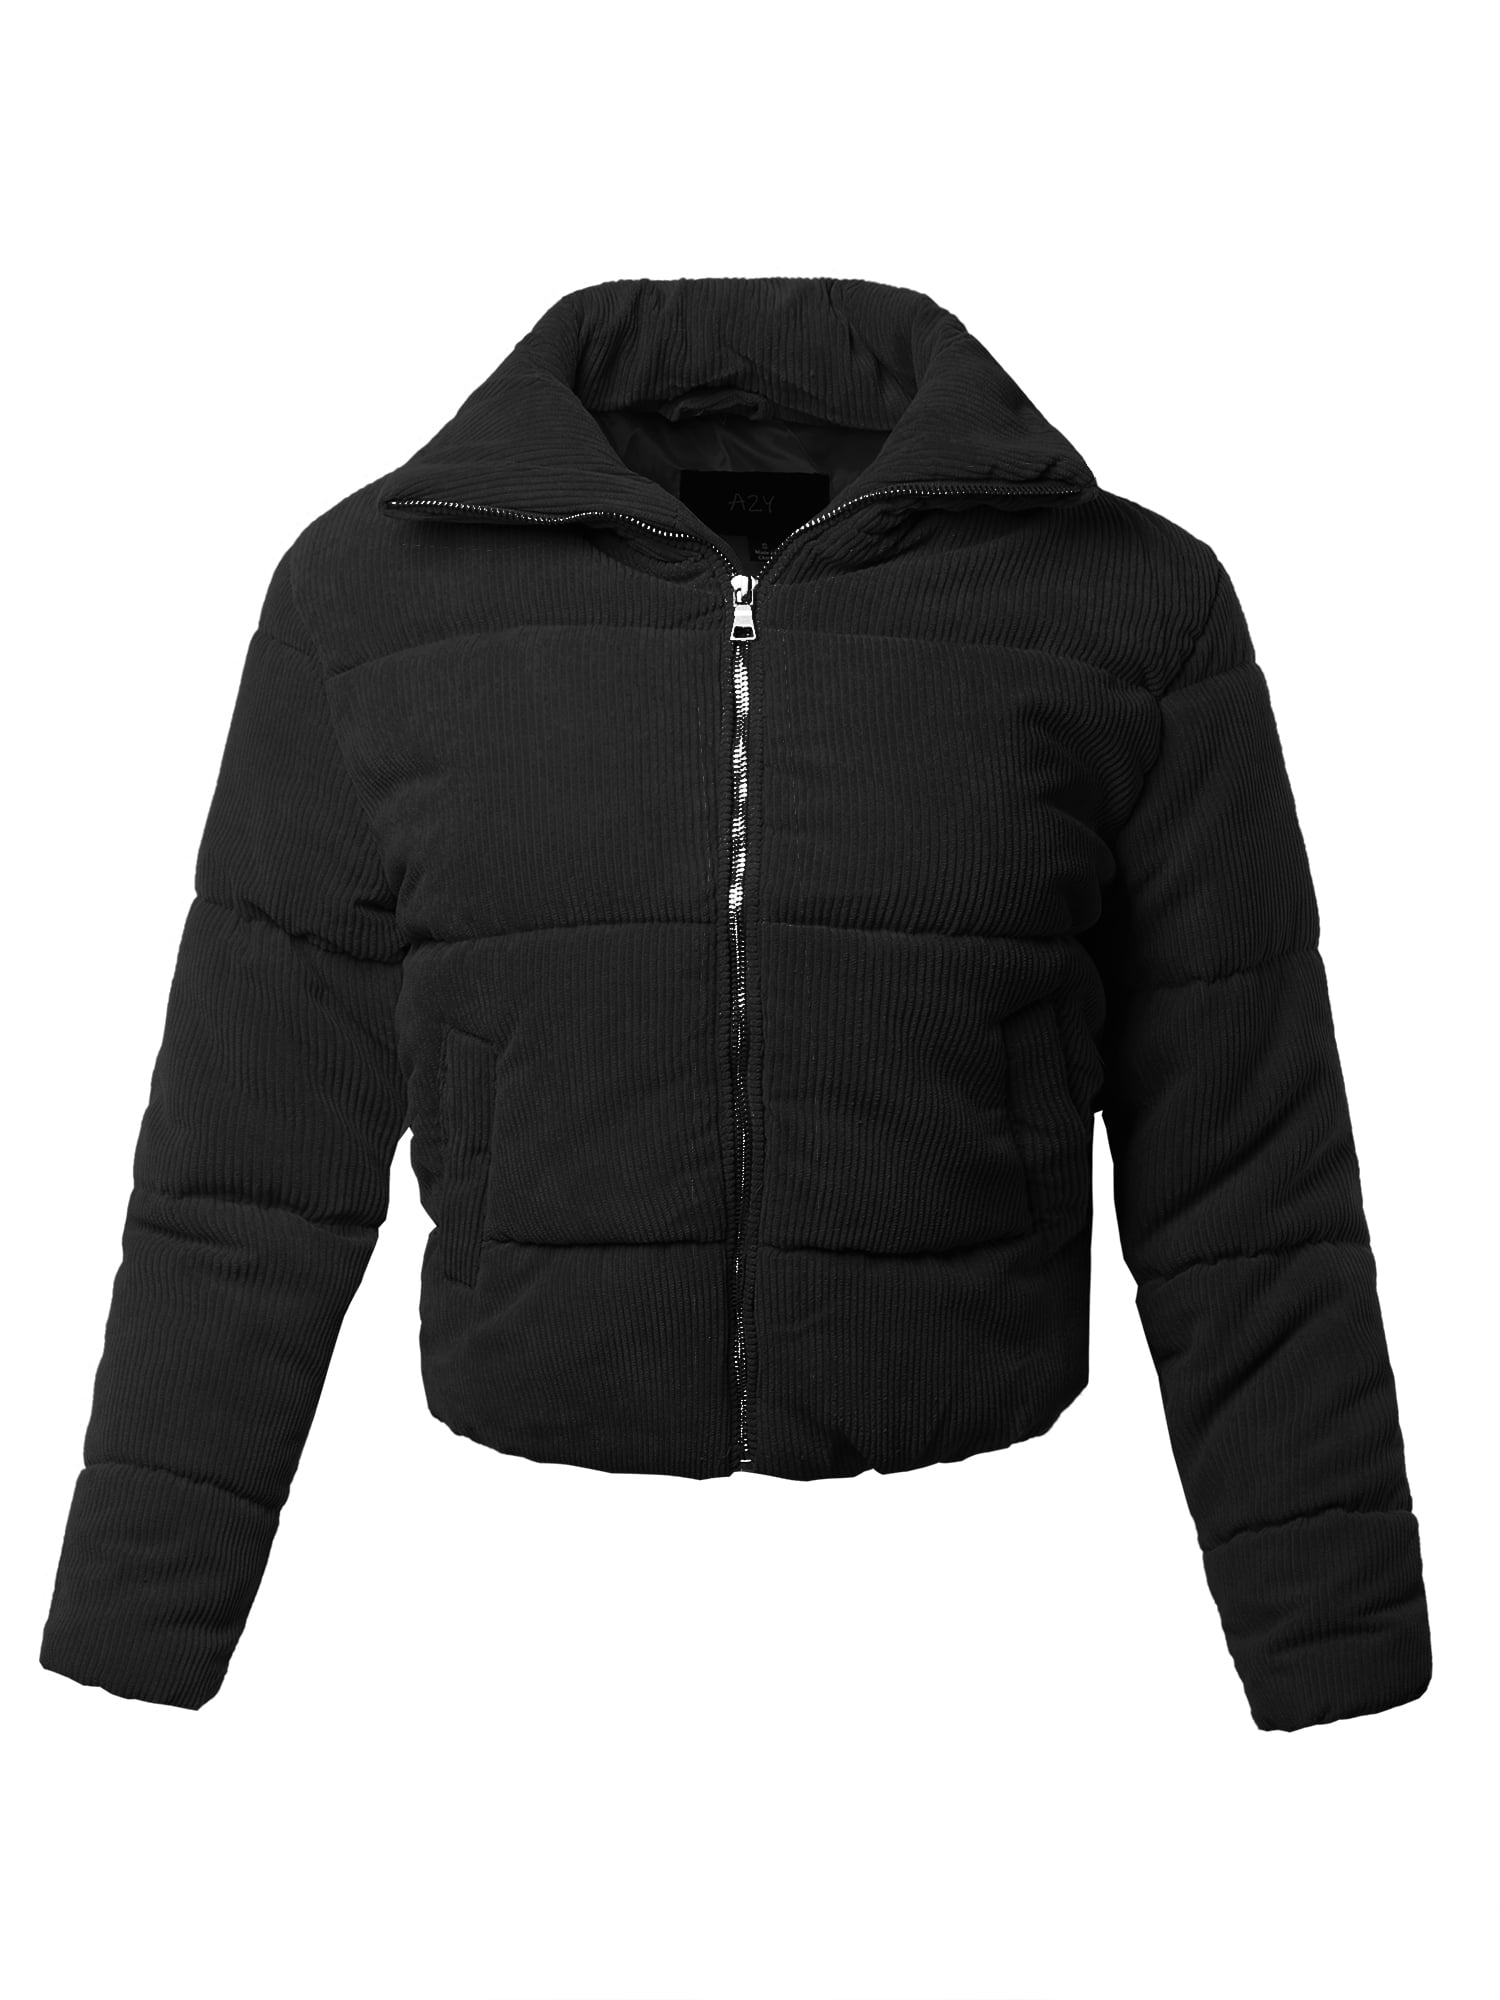 A2Y Women's Corduroy High Neck Quilted Puffer Jacket Black 2XL ...